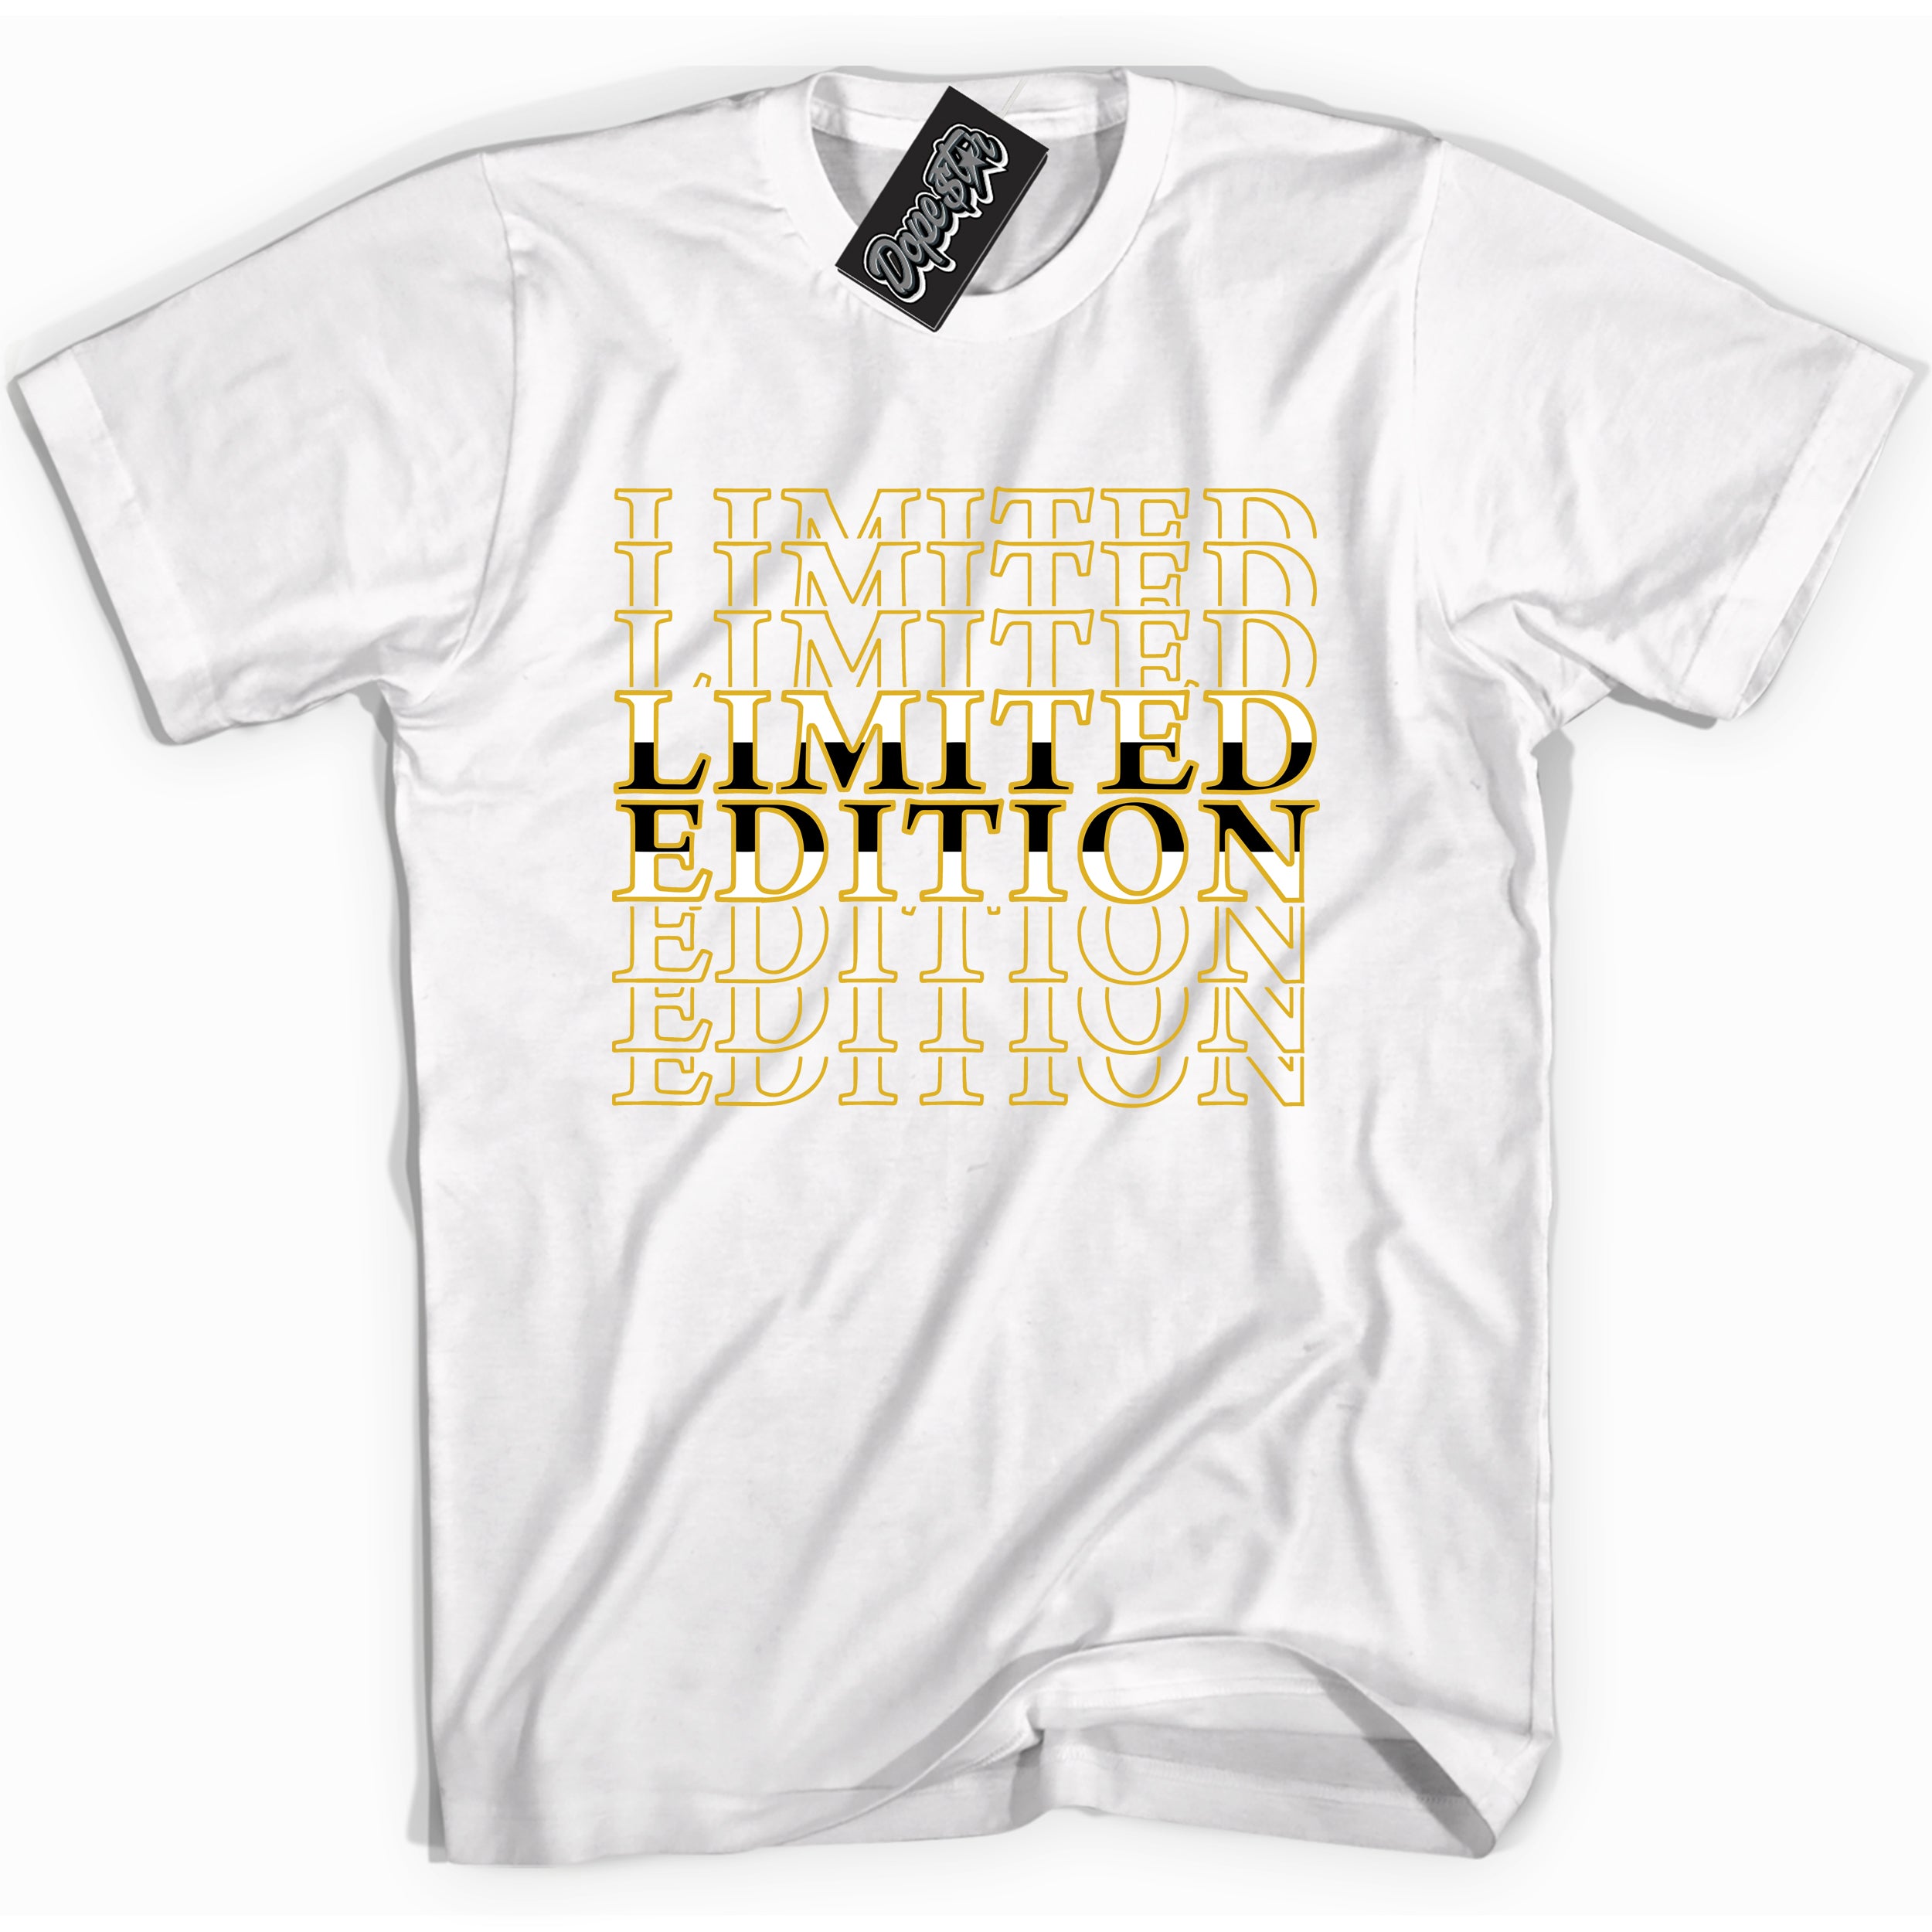 Cool white Shirt with “ Limited Edition ” design that perfectly matches Yellow Ochre 6s Sneakers.